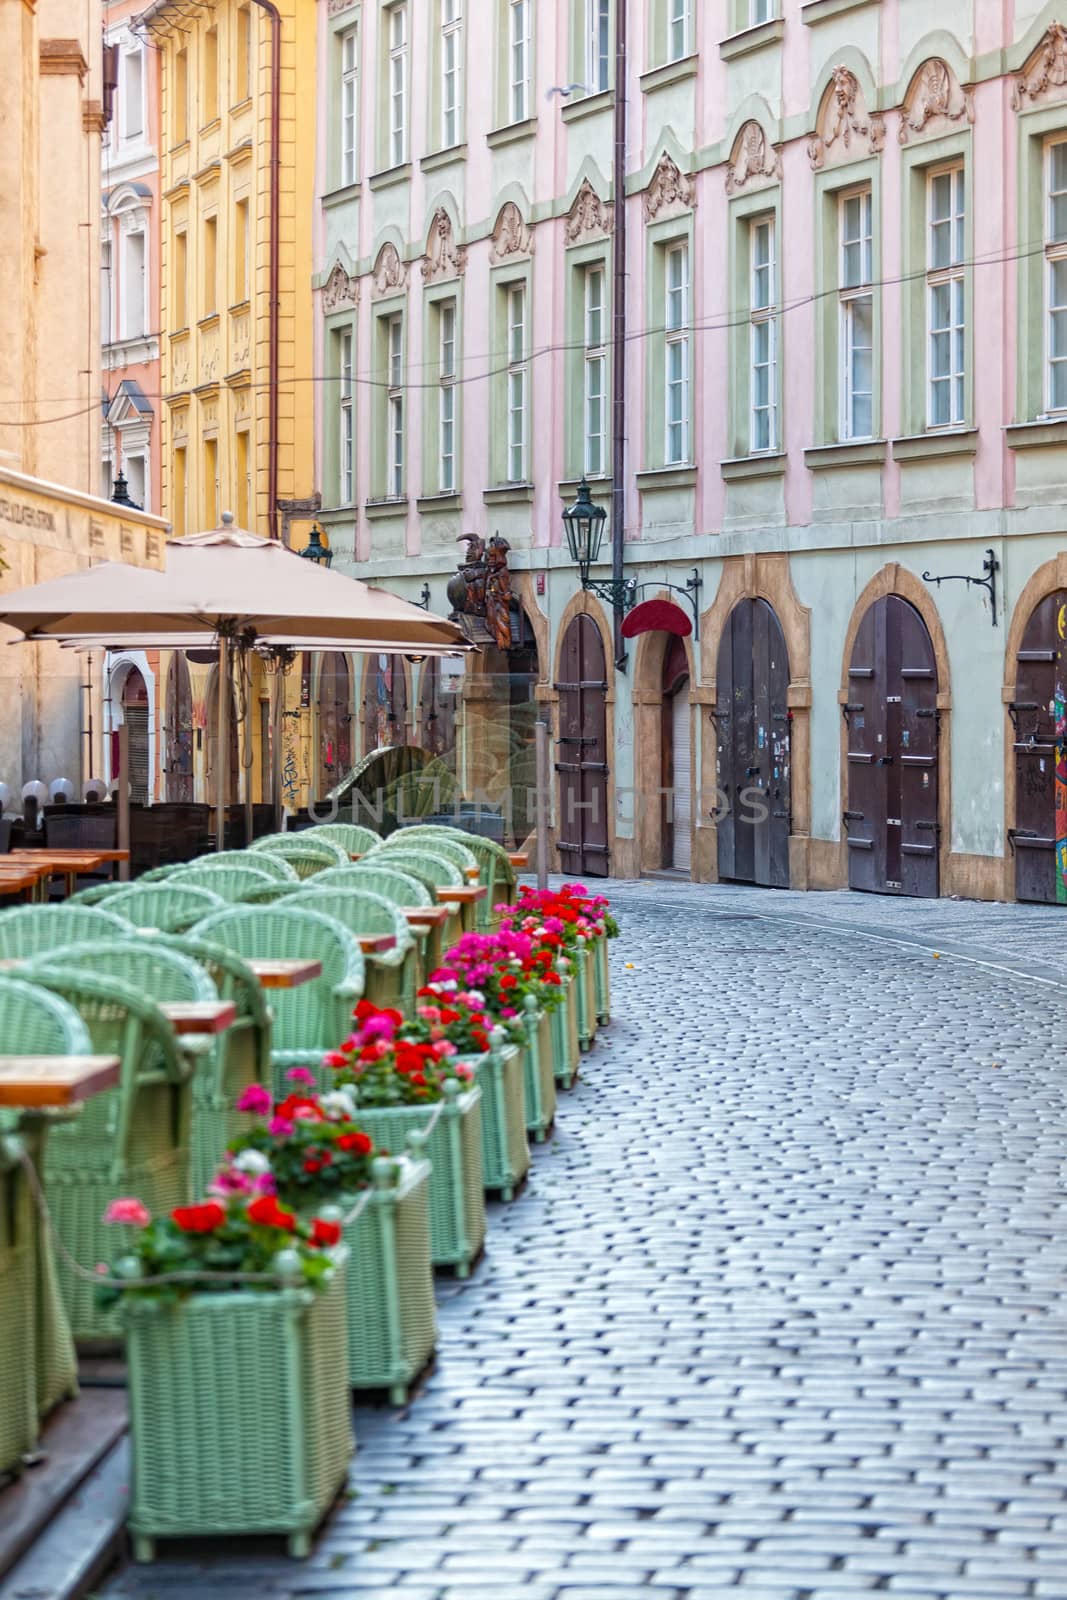 Street cafe in the historical district of Prague, the Czech Republic